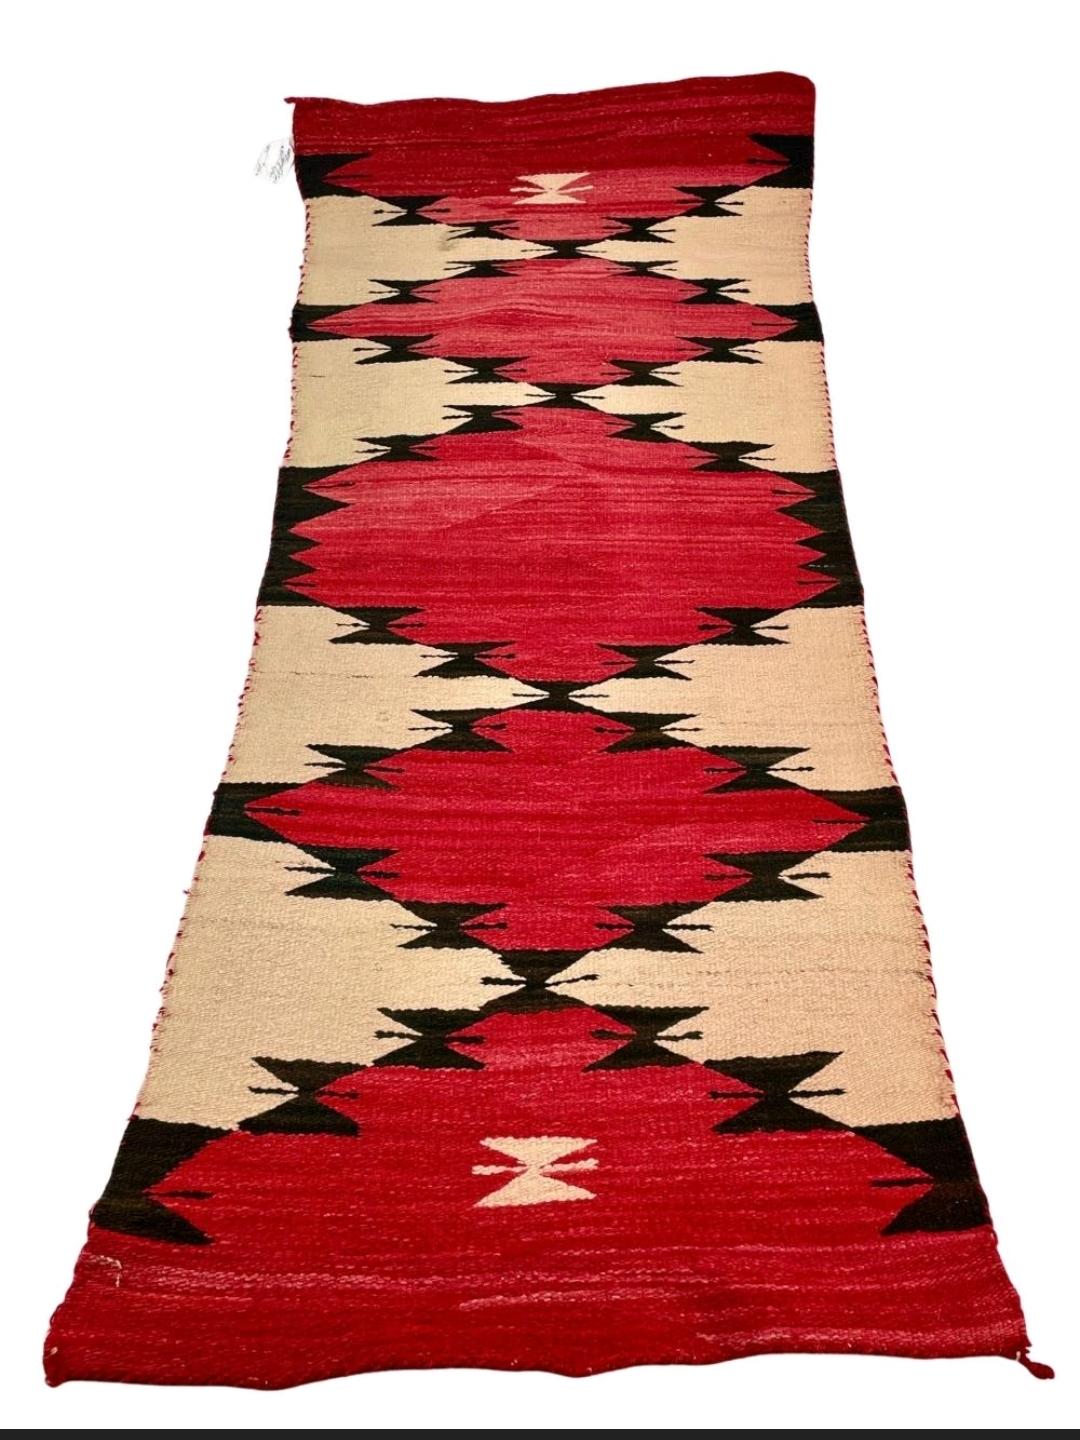 Purchased circa 1900 from a trading post in Chaco Canyon, New Mexico. A hand woven Navajo runner with red, black and cream coloring of very dramatic design. 
From the lifelong collection of Edythe and Donald Aukerman.